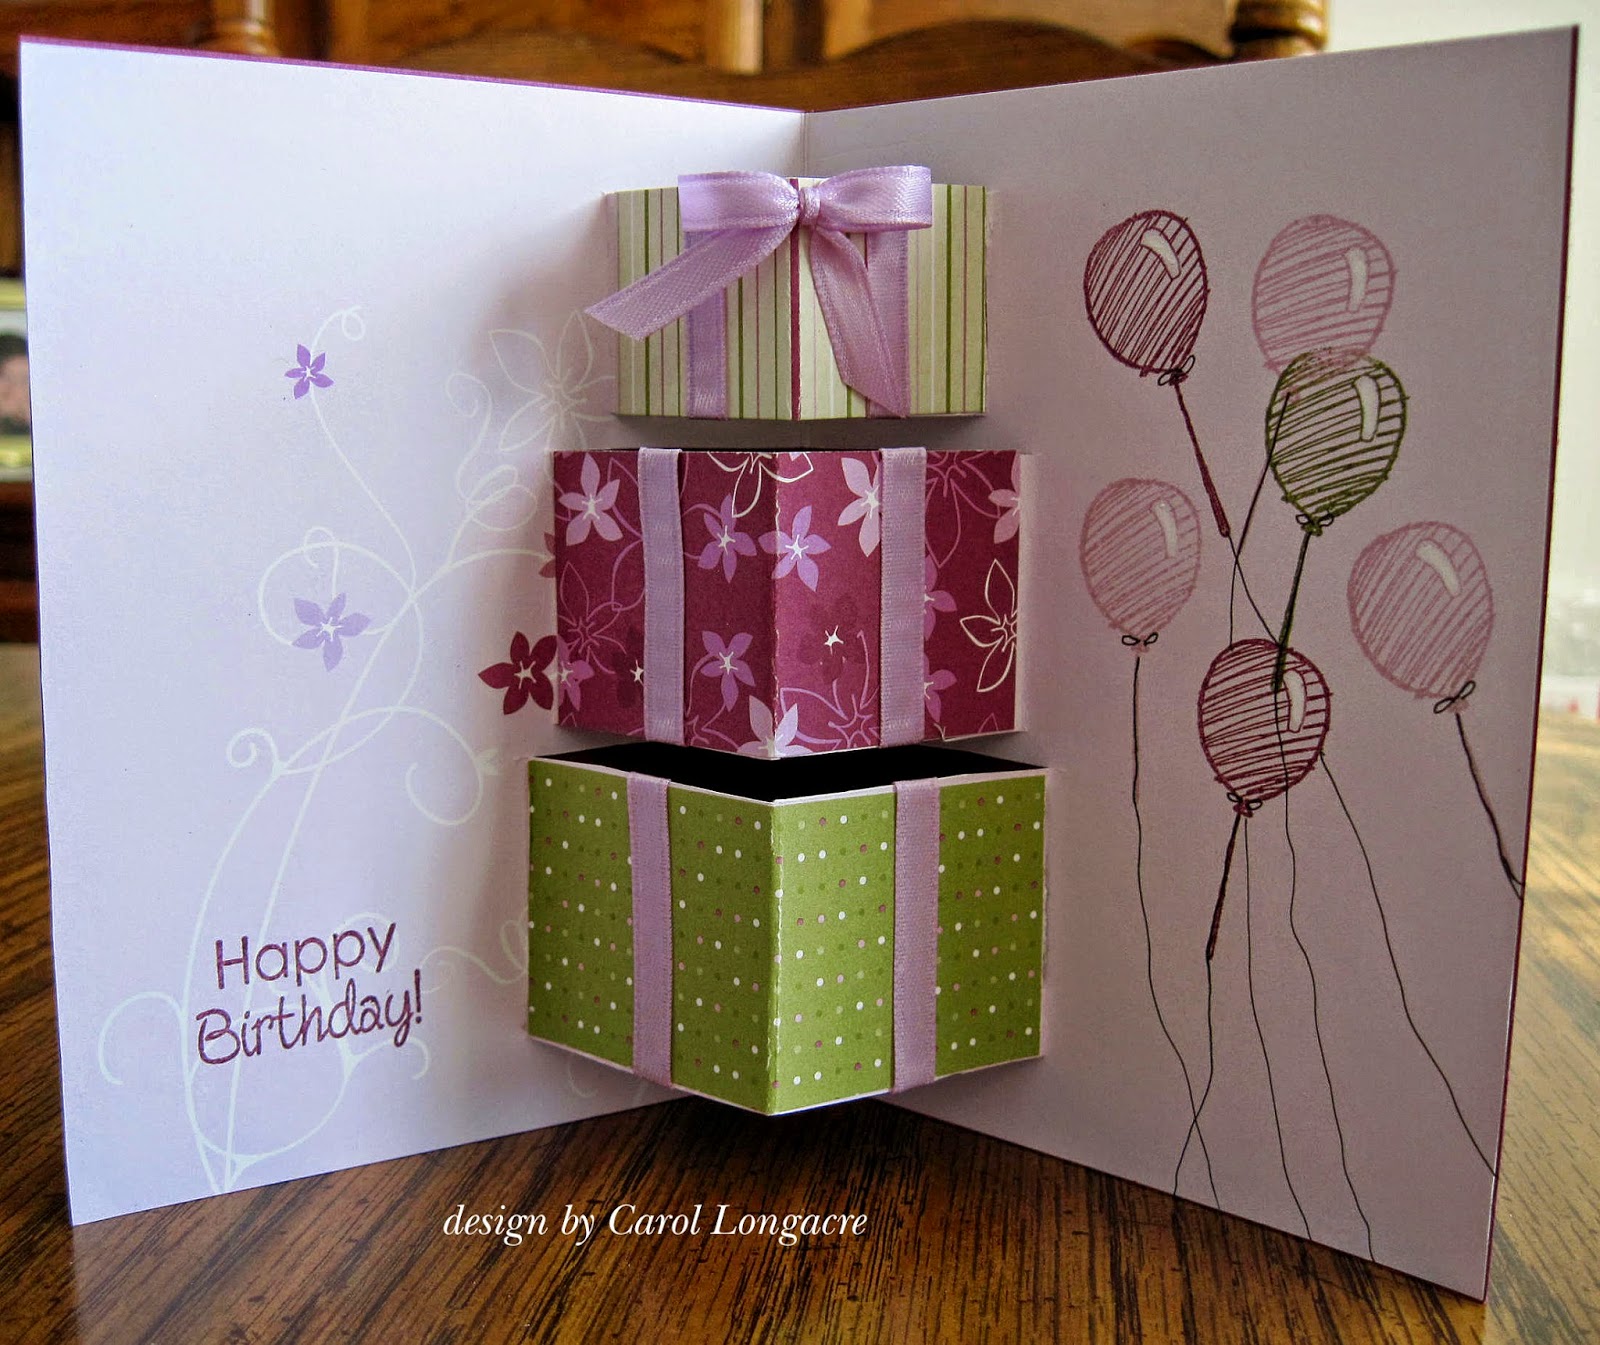 Our Little Inspirations: Pop-Up Birthday Card